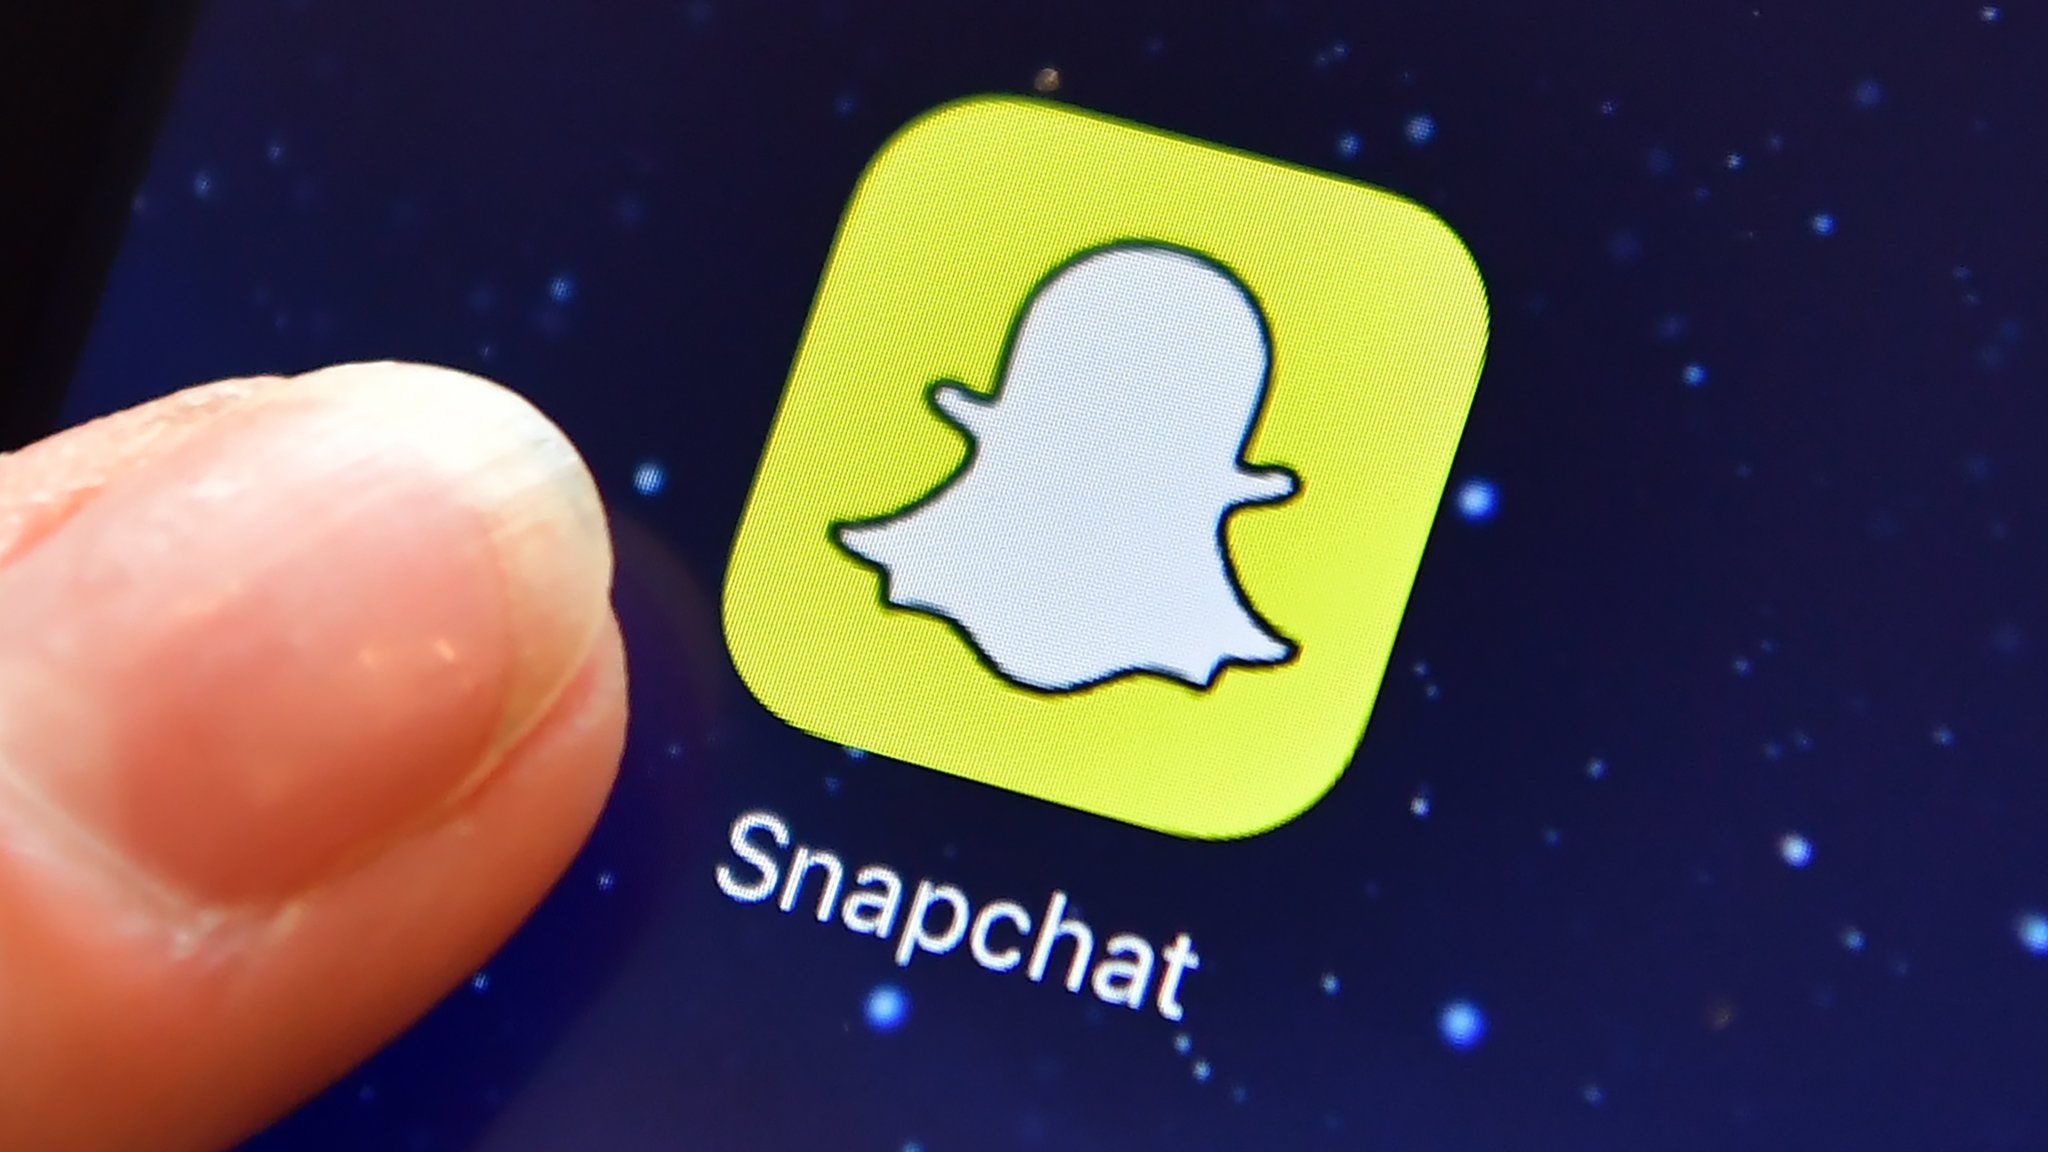 A finger is posed next to the Snapchat app logo on an iPad on August 3, 2016 in London, England